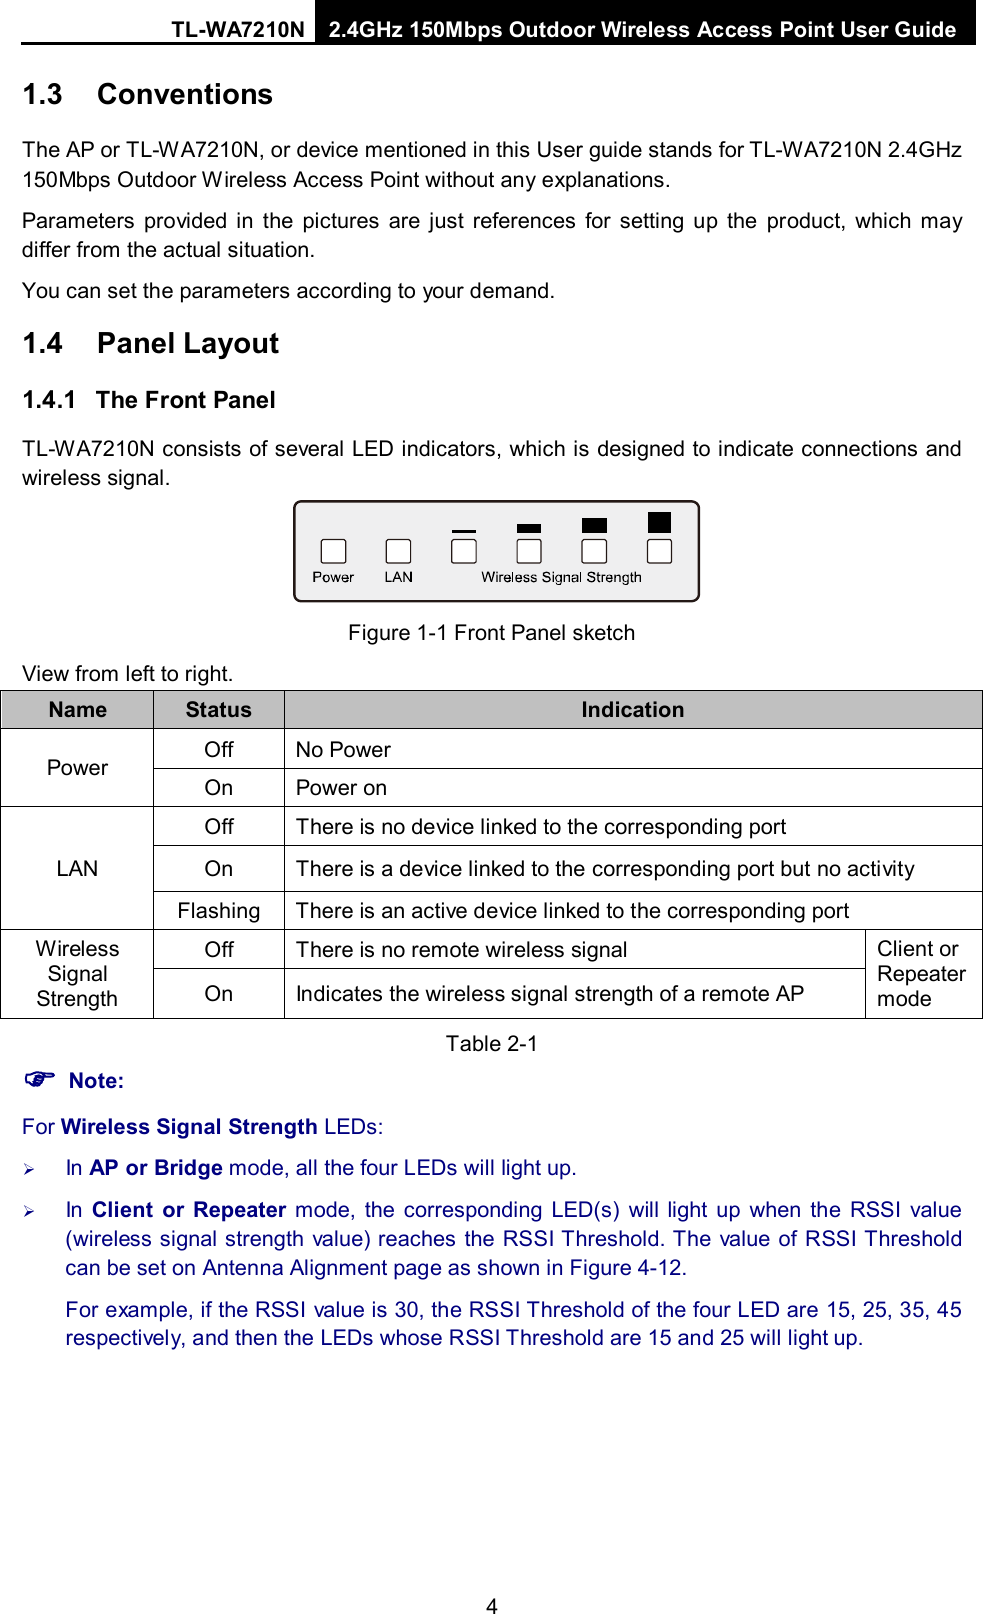 TL-WA7210N 2.4GHz 150Mbps Outdoor Wireless Access Point User Guide  4 1.3  Conventions The AP or TL-WA7210N, or device mentioned in this User guide stands for TL-WA7210N 2.4GHz 150Mbps Outdoor Wireless Access Point without any explanations. Parameters provided in the pictures are just references for setting up the product, which may differ from the actual situation. You can set the parameters according to your demand. 1.4 Panel Layout 1.4.1 The Front Panel TL-WA7210N consists of several LED indicators, which is designed to indicate connections and wireless signal.     Figure 1-1 Front Panel sketch View from left to right. Name  Status Indication Power Off No Power On  Power on LAN Off There is no device linked to the corresponding port On There is a device linked to the corresponding port but no activity Flashing There is an active device linked to the corresponding port Wireless Signal Strength Off  There is no remote wireless signal Client or Repeater mode On  Indicates the wireless signal strength of a remote AP Table 2-1  Note: For Wireless Signal Strength LEDs:  In AP or Bridge mode, all the four LEDs will light up.  In  Client or Repeater mode, the corresponding LED(s) will light up when the RSSI value (wireless signal strength value) reaches the RSSI Threshold. The value of RSSI Threshold can be set on Antenna Alignment page as shown in Figure 4-12. For example, if the RSSI value is 30, the RSSI Threshold of the four LED are 15, 25, 35, 45 respectively, and then the LEDs whose RSSI Threshold are 15 and 25 will light up. 